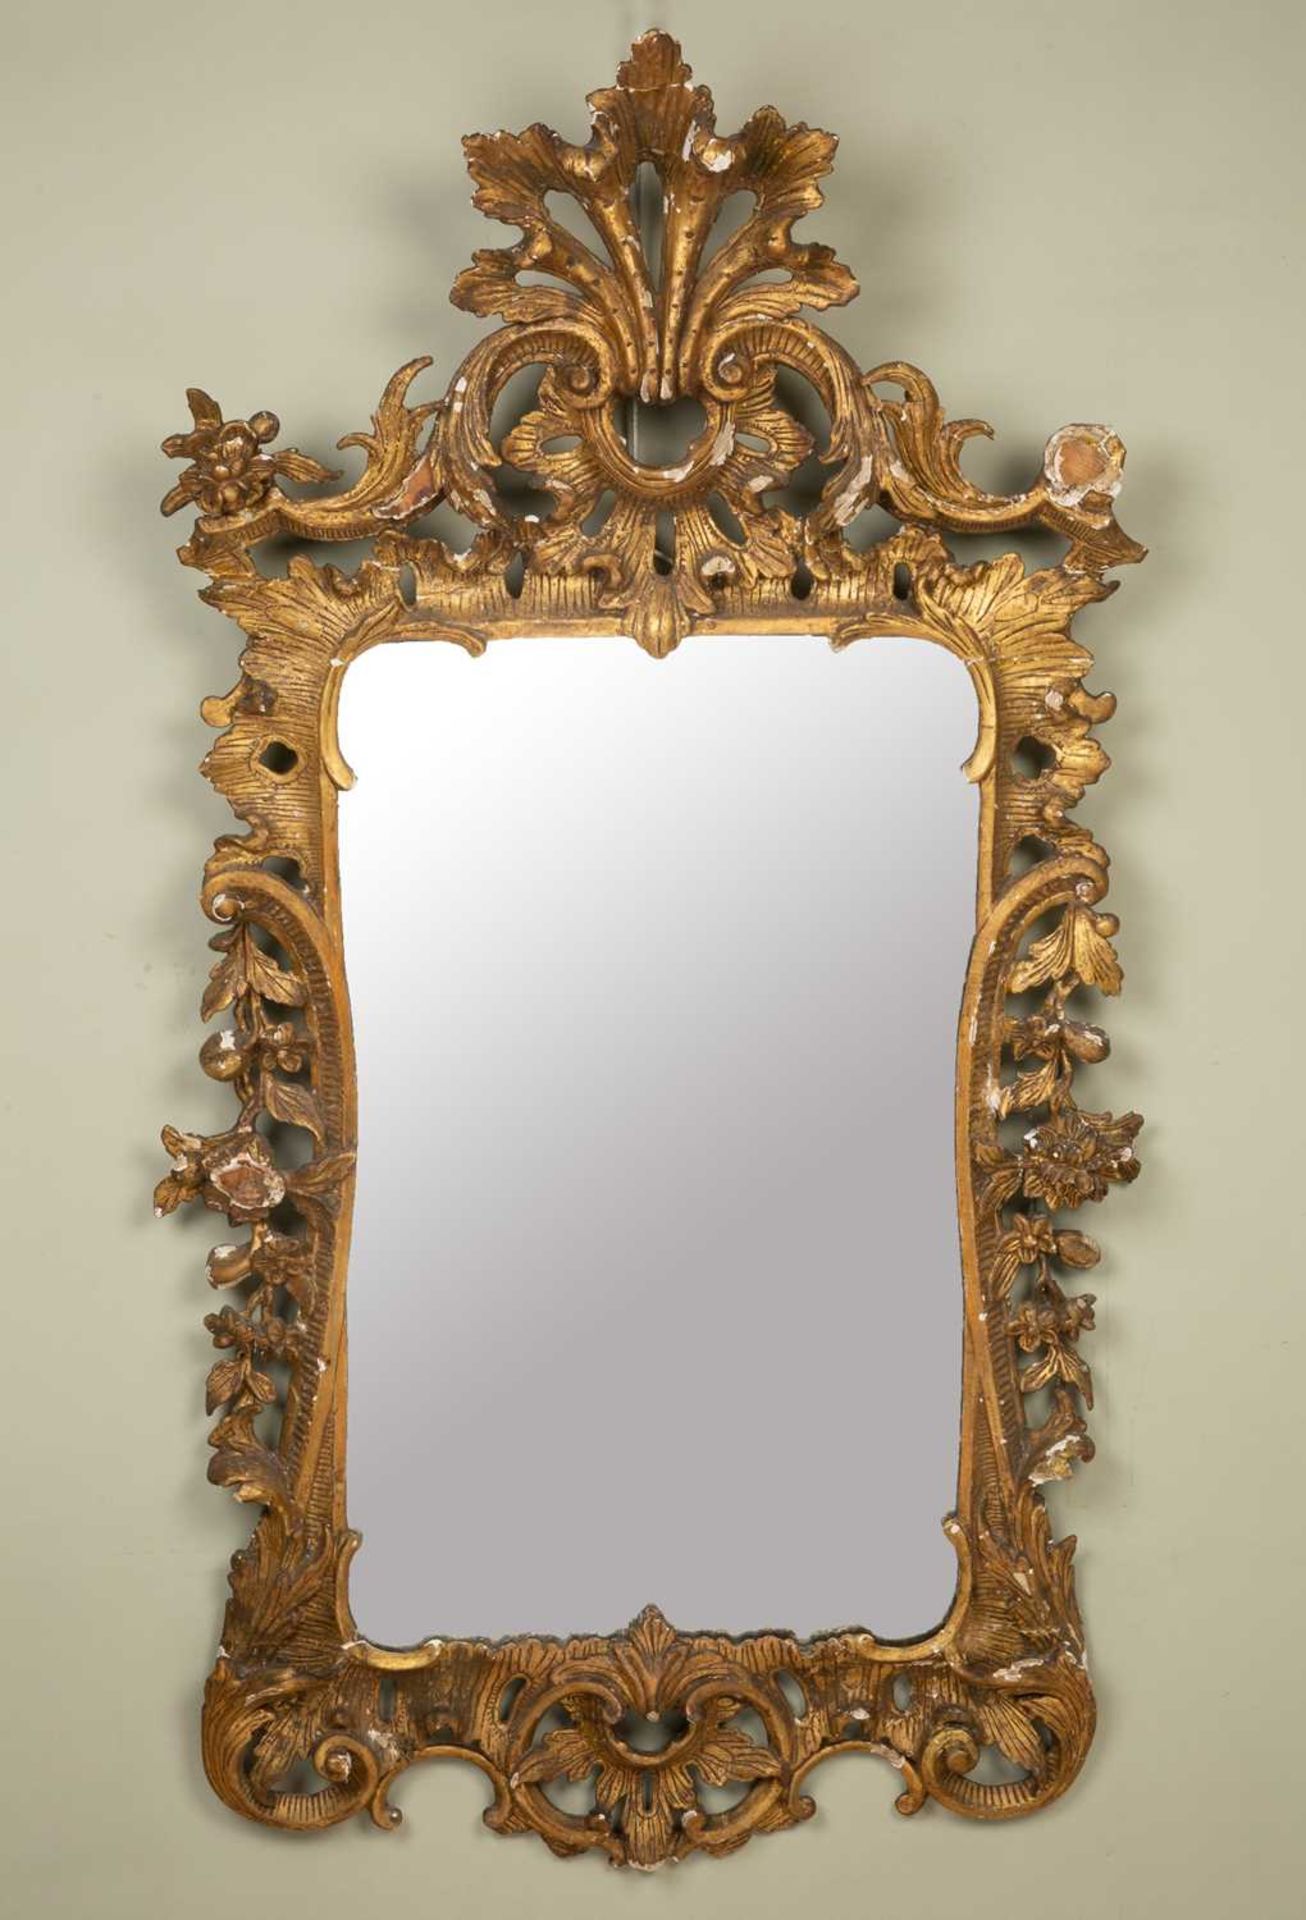 An 18th century carved giltwood pier glass or wall mirror with rocaille scroll crest and